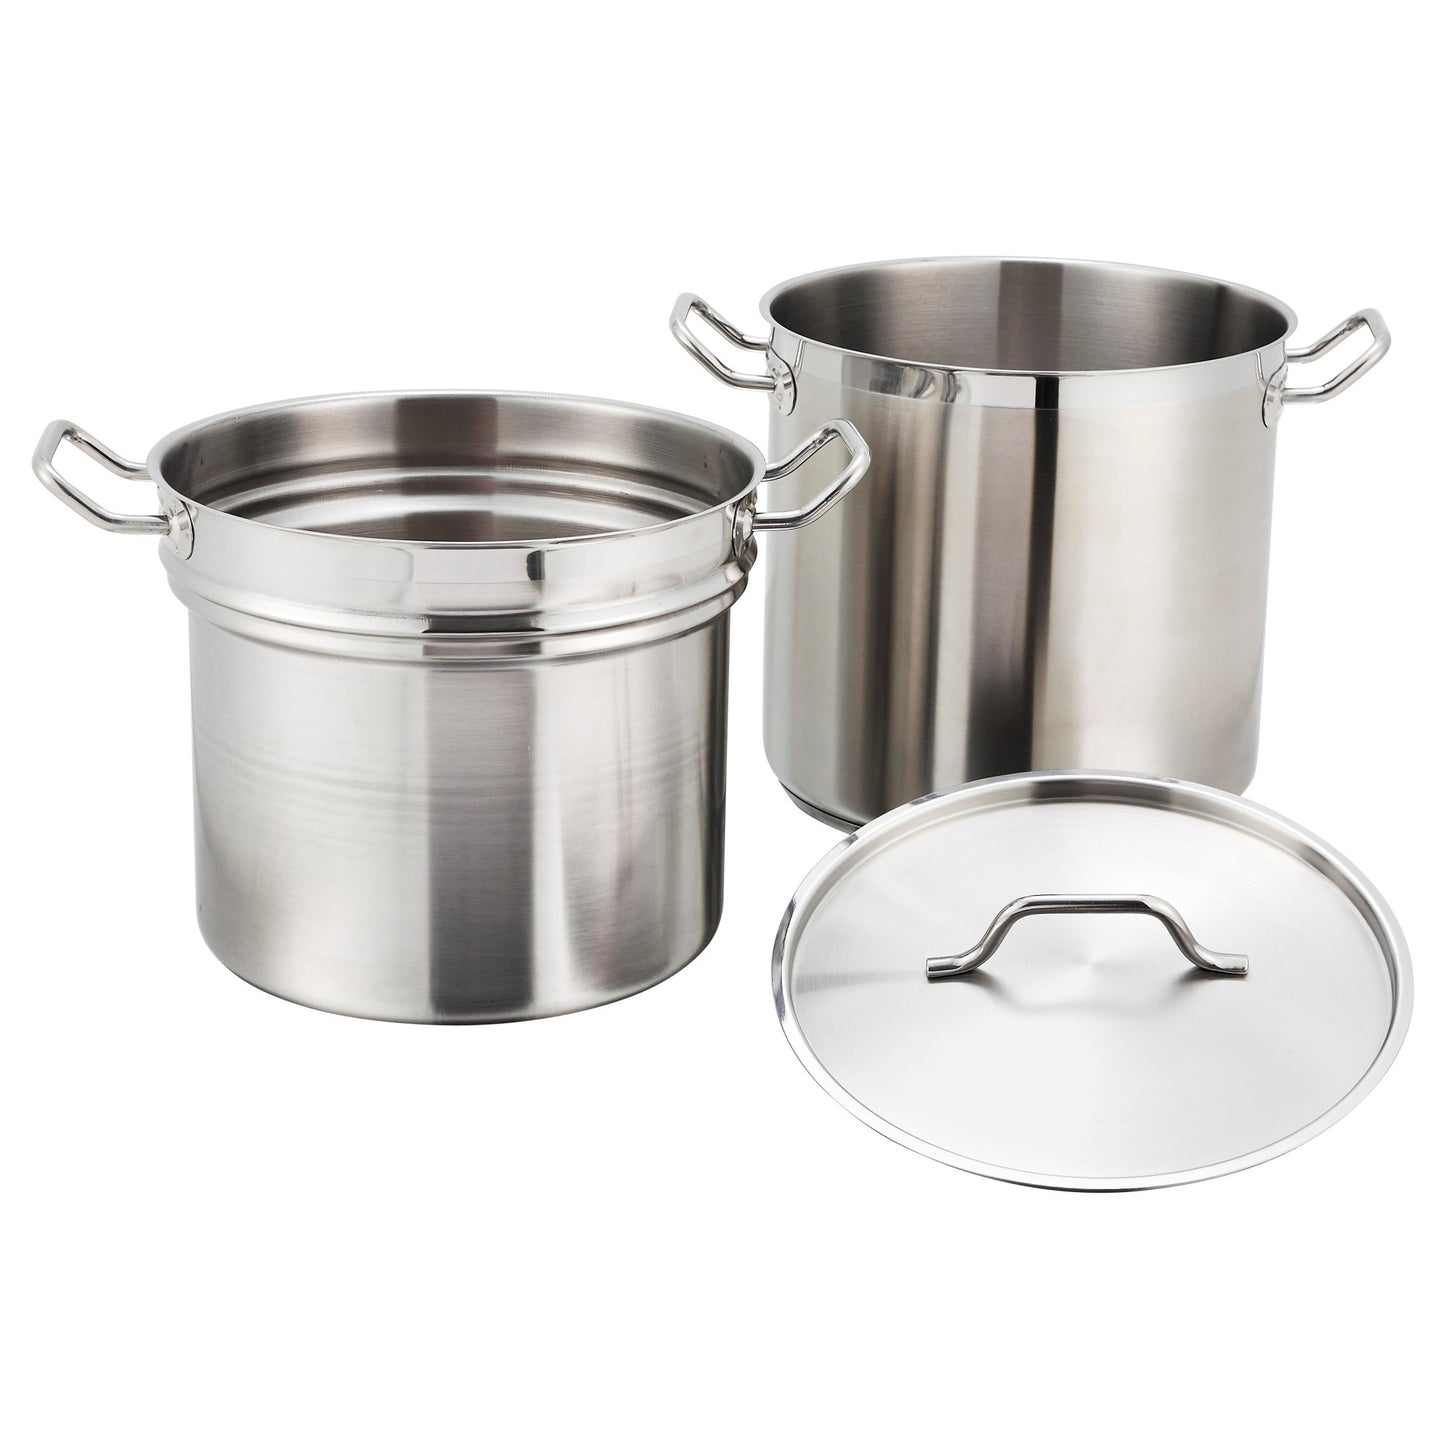 SSDB-20 - Stainless Steel Double Boiler with Cover - 20 Quart